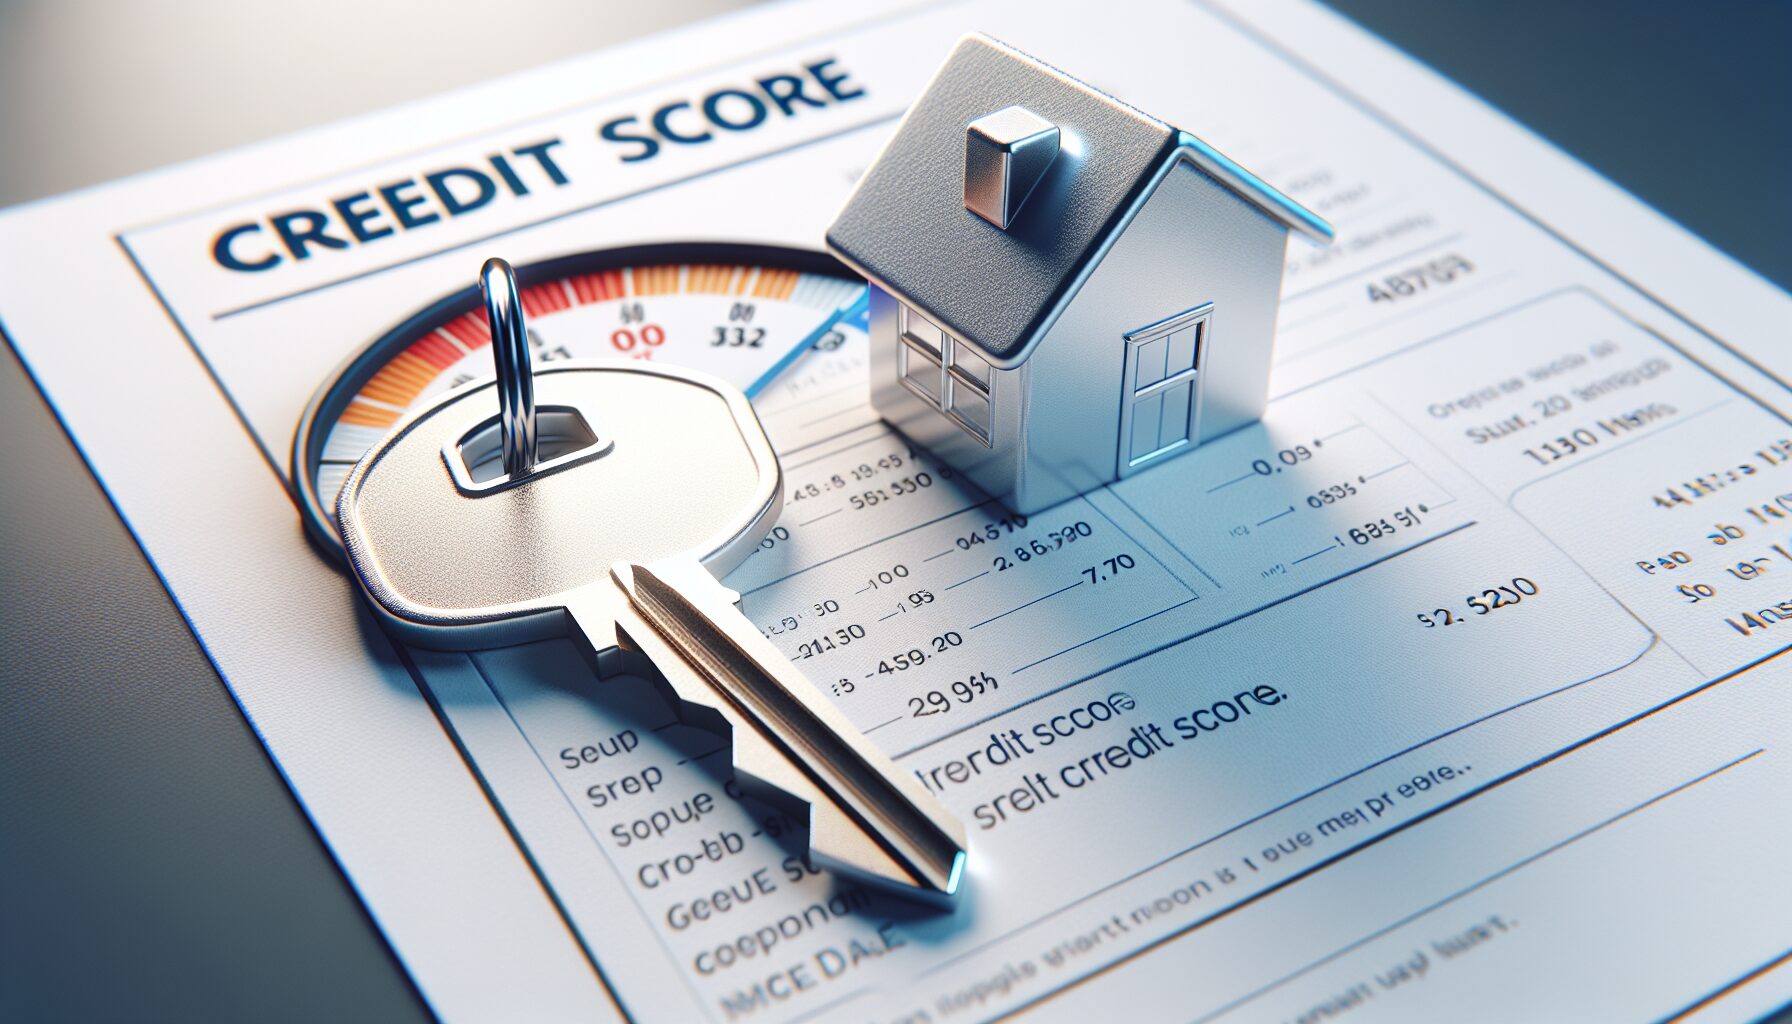 Is 750 A Good Credit Score To Buy A House?